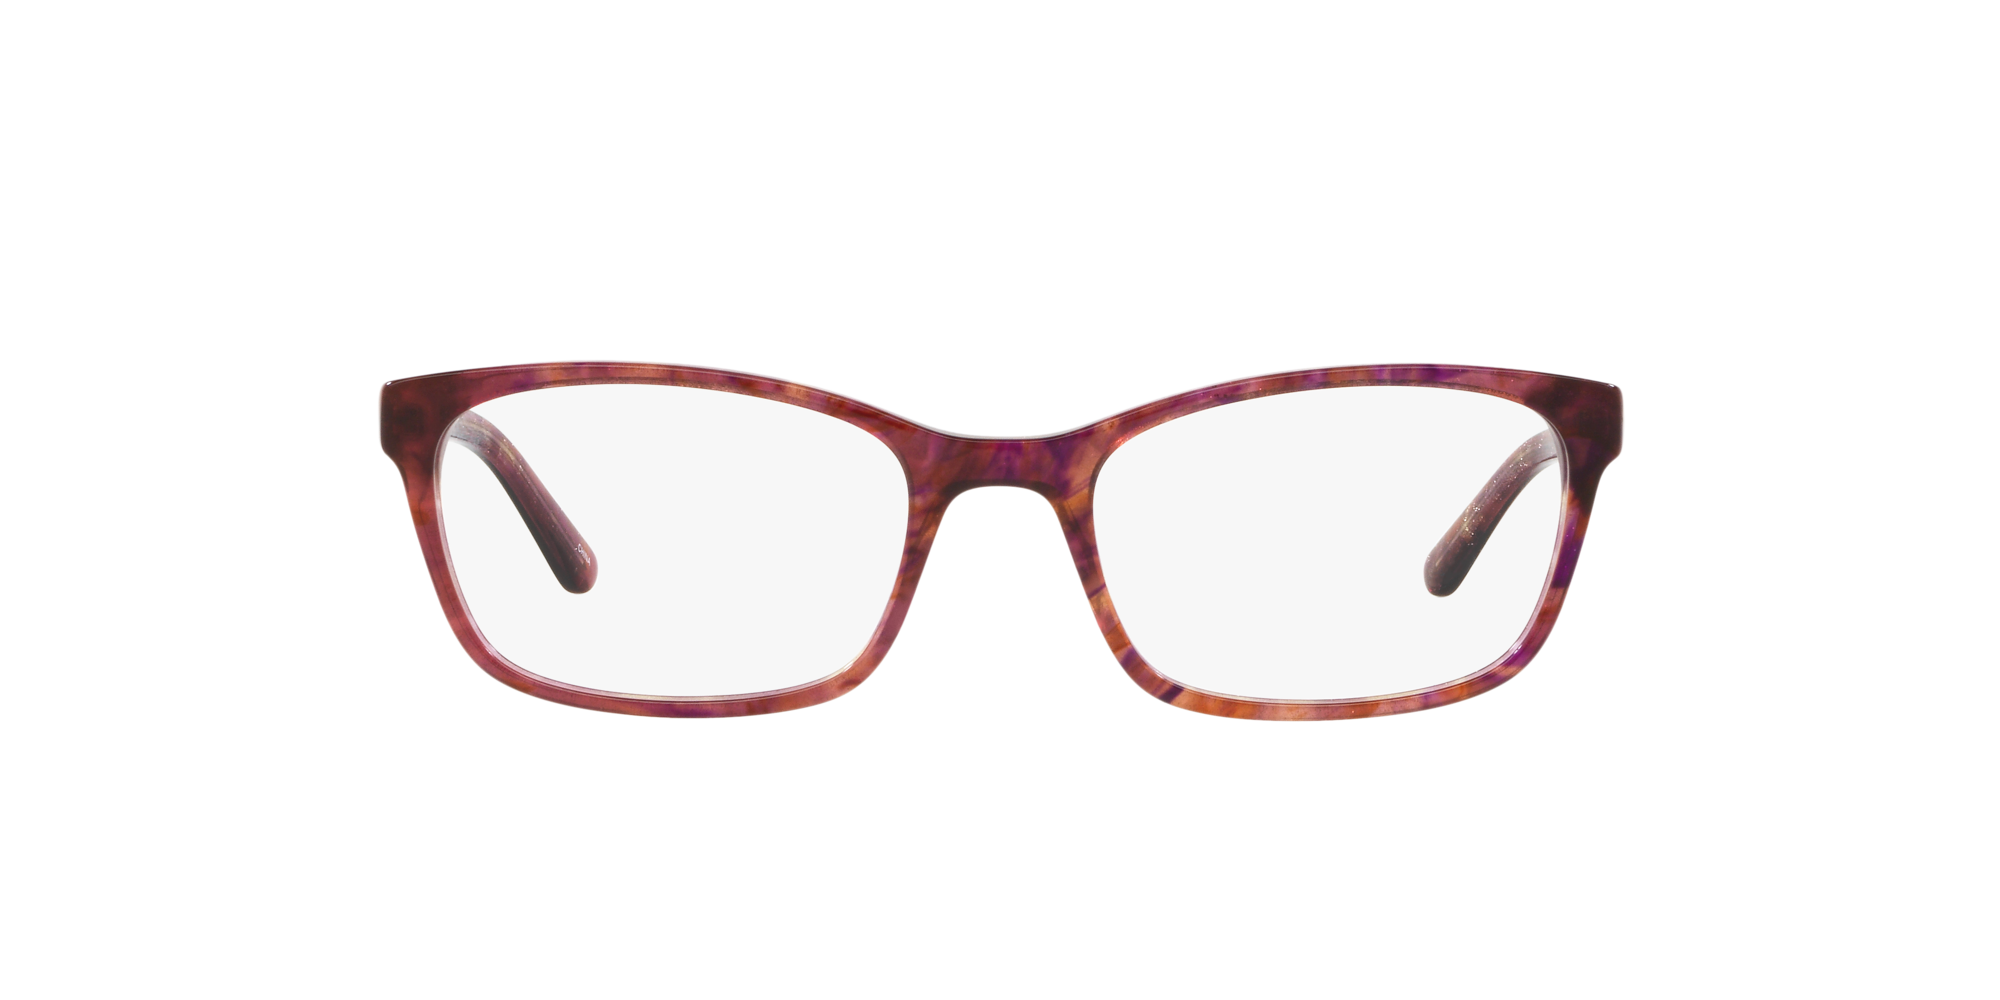 A New Day 0A32054 Glasses in Pink/purple | Target Optical